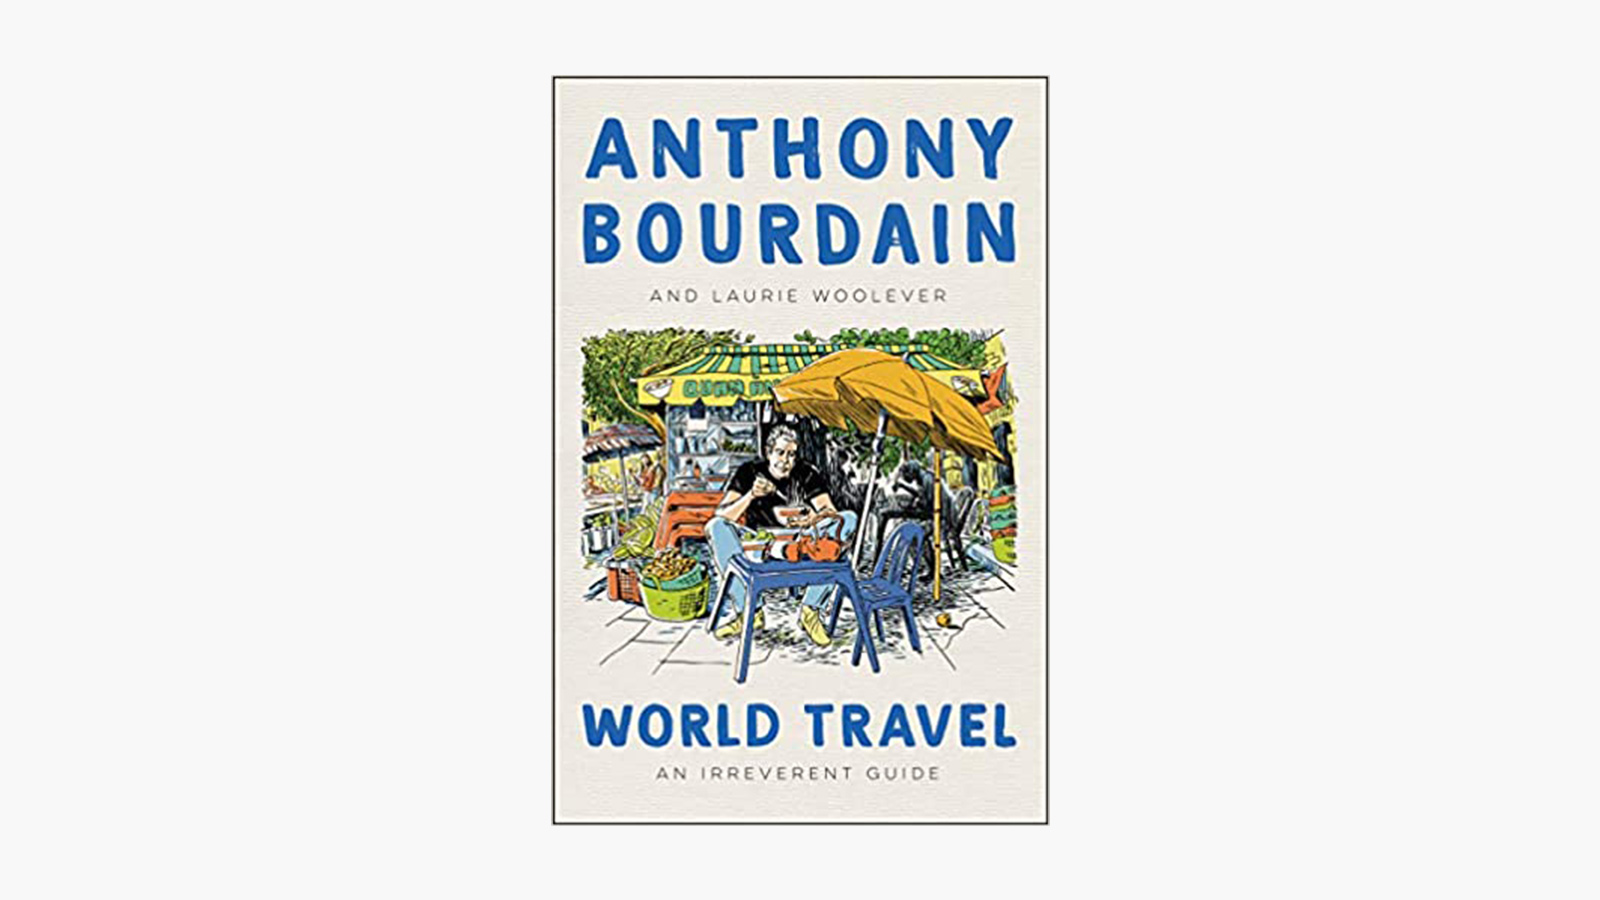 ‘World Travel: An Irreverent Guide’ by Anthony Bourdain and Laurie Woolever 